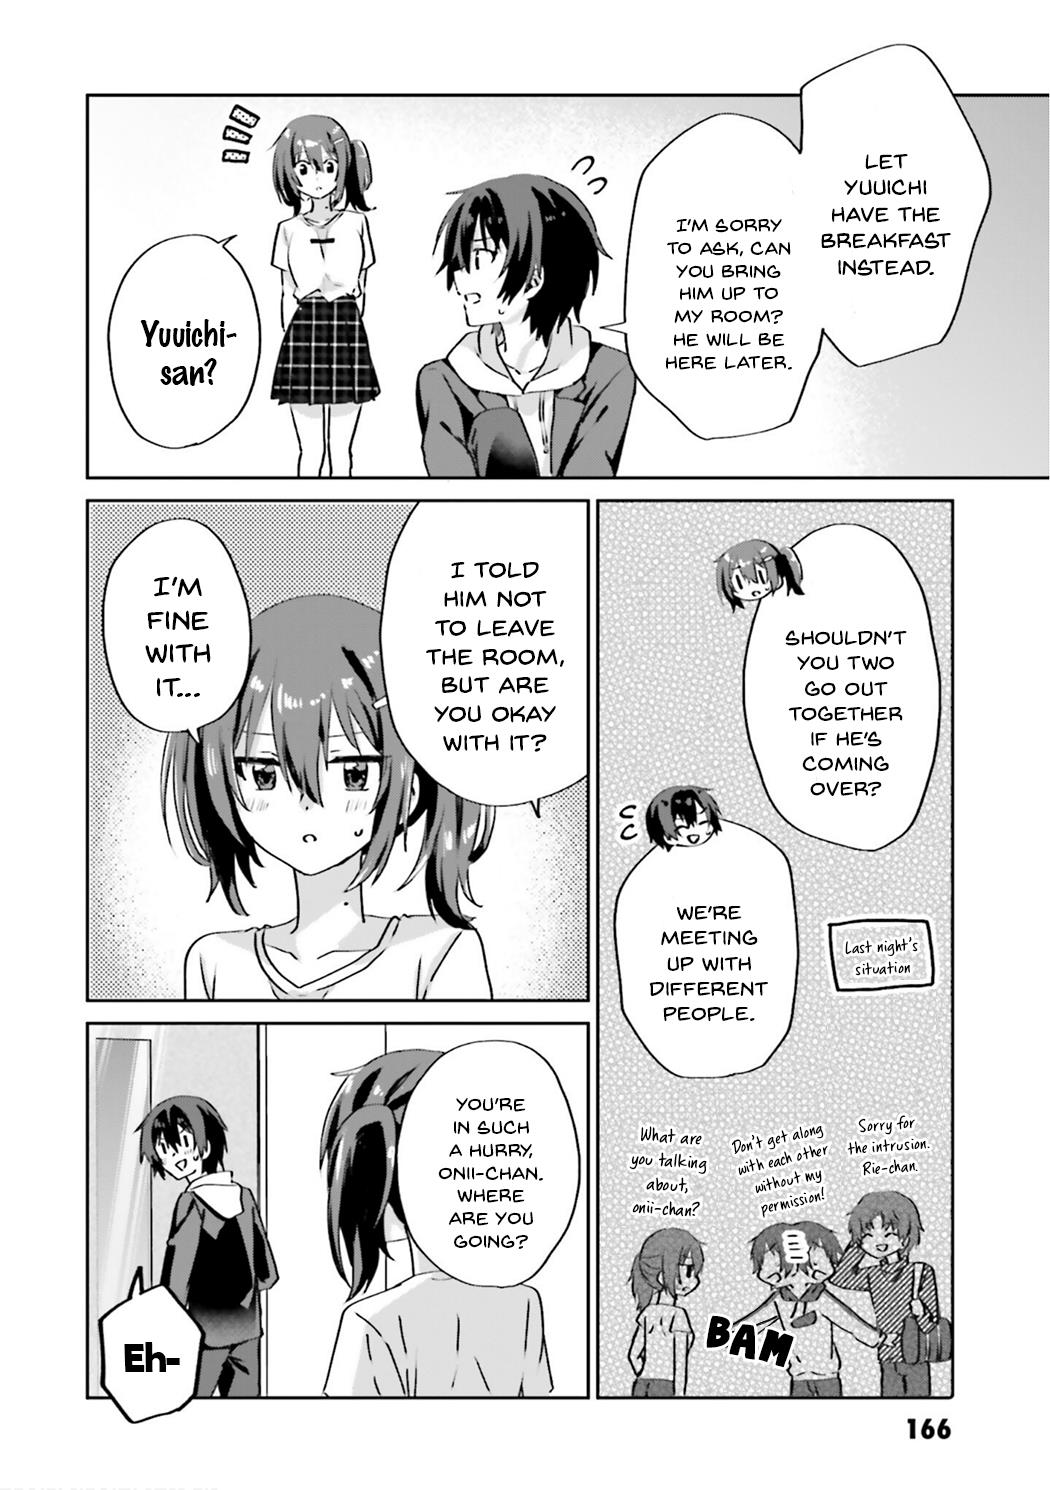 Since I’Ve Entered The World Of Romantic Comedy Manga, I’Ll Do My Best To Make The Losing Heroine Happy - Page 2